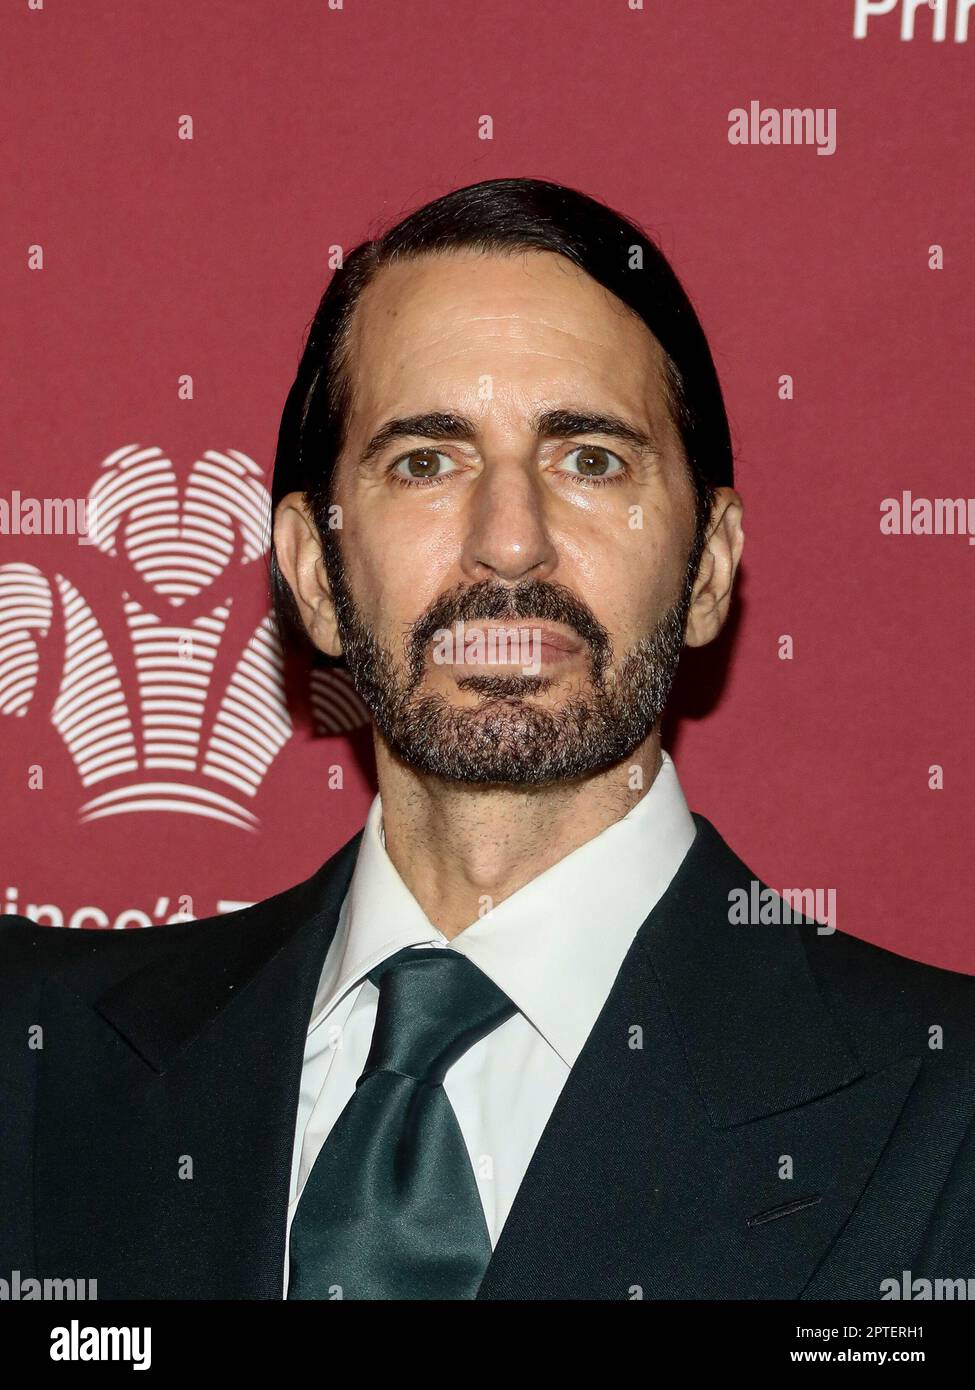 Fashion designer Marc Jacobs attends The Prince's Trust Global